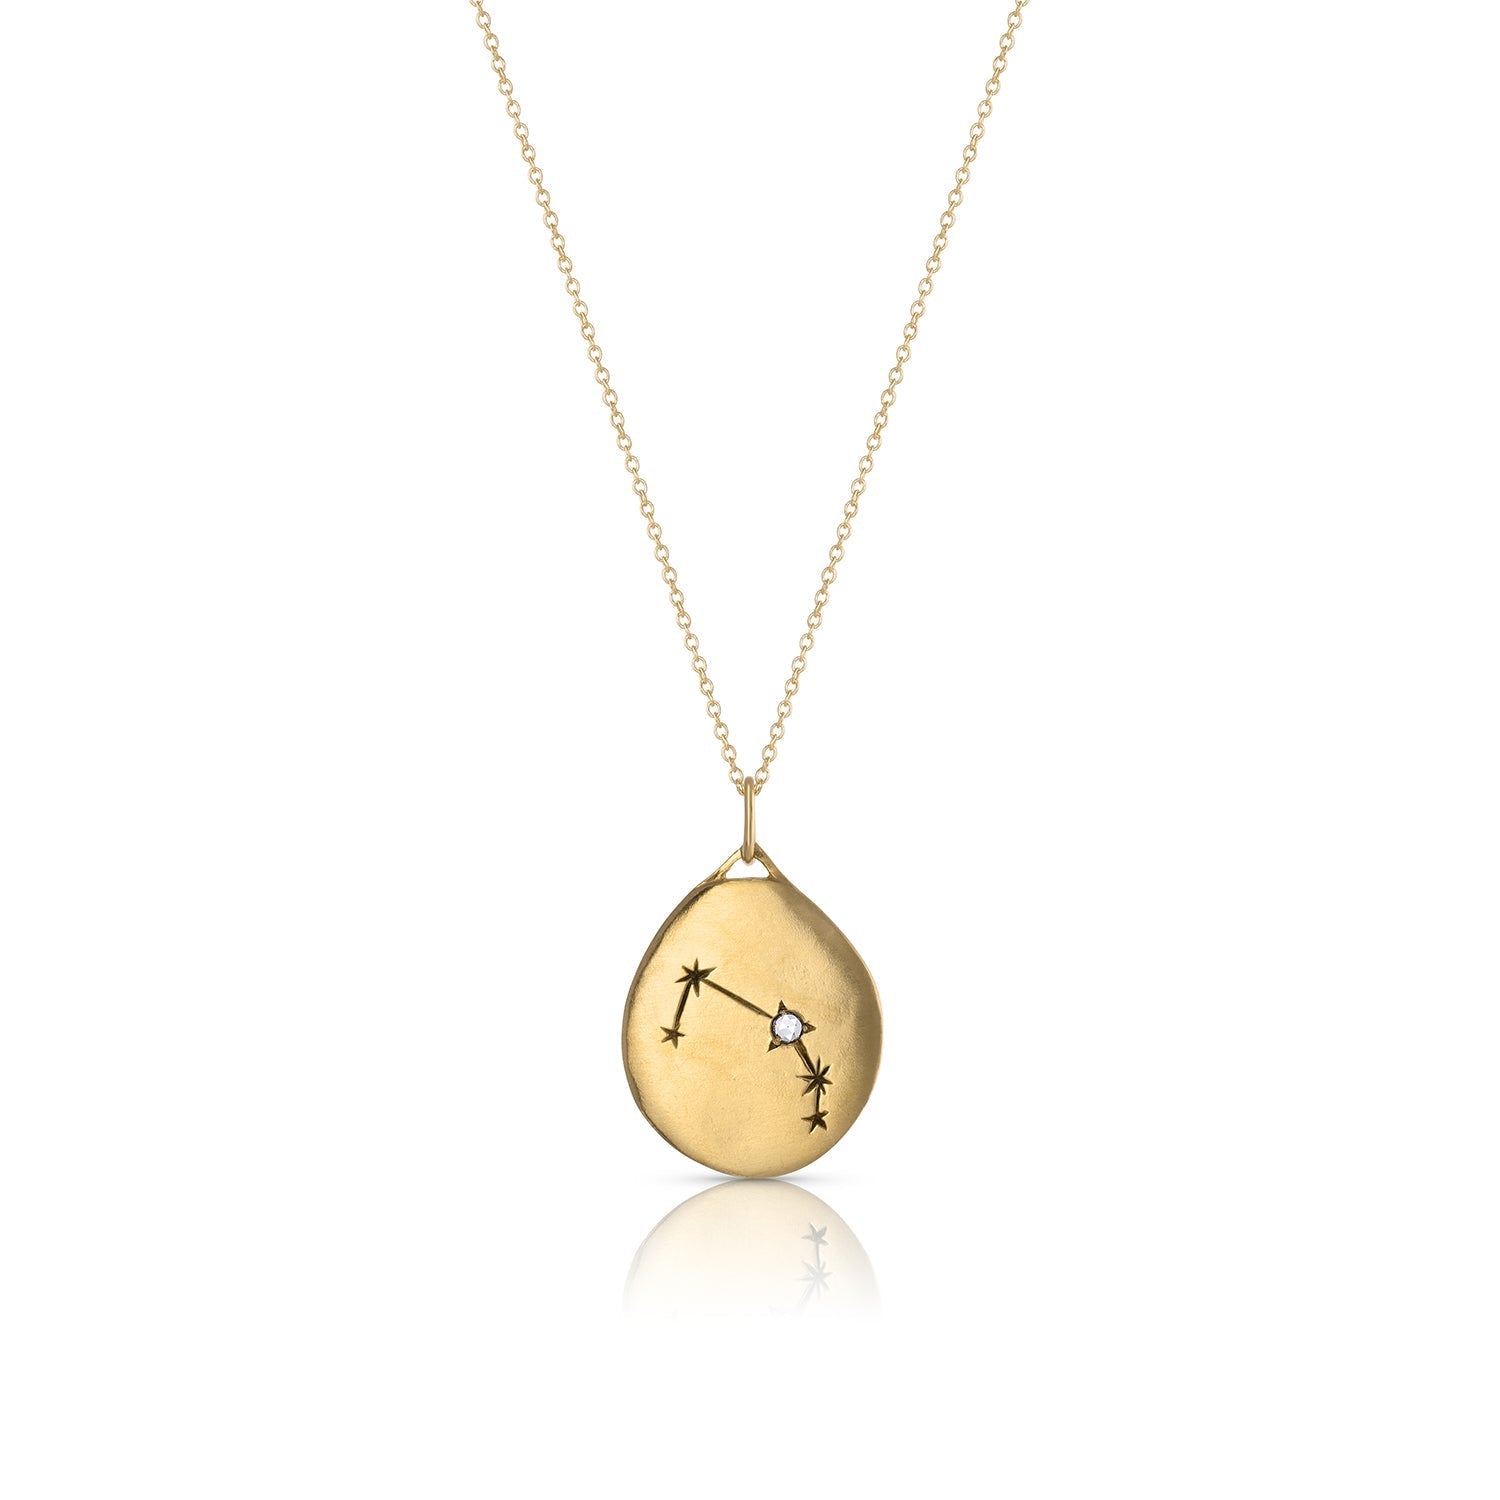 Aries Celestial Zodiac Necklace | 12th HOUSE | Mystical Fine Jewelry | Gold constellation necklace | Fine zodiac necklace 14k gold constellation necklace Constellation necklace Aries constellation necklace Gold Aries constellation necklace |